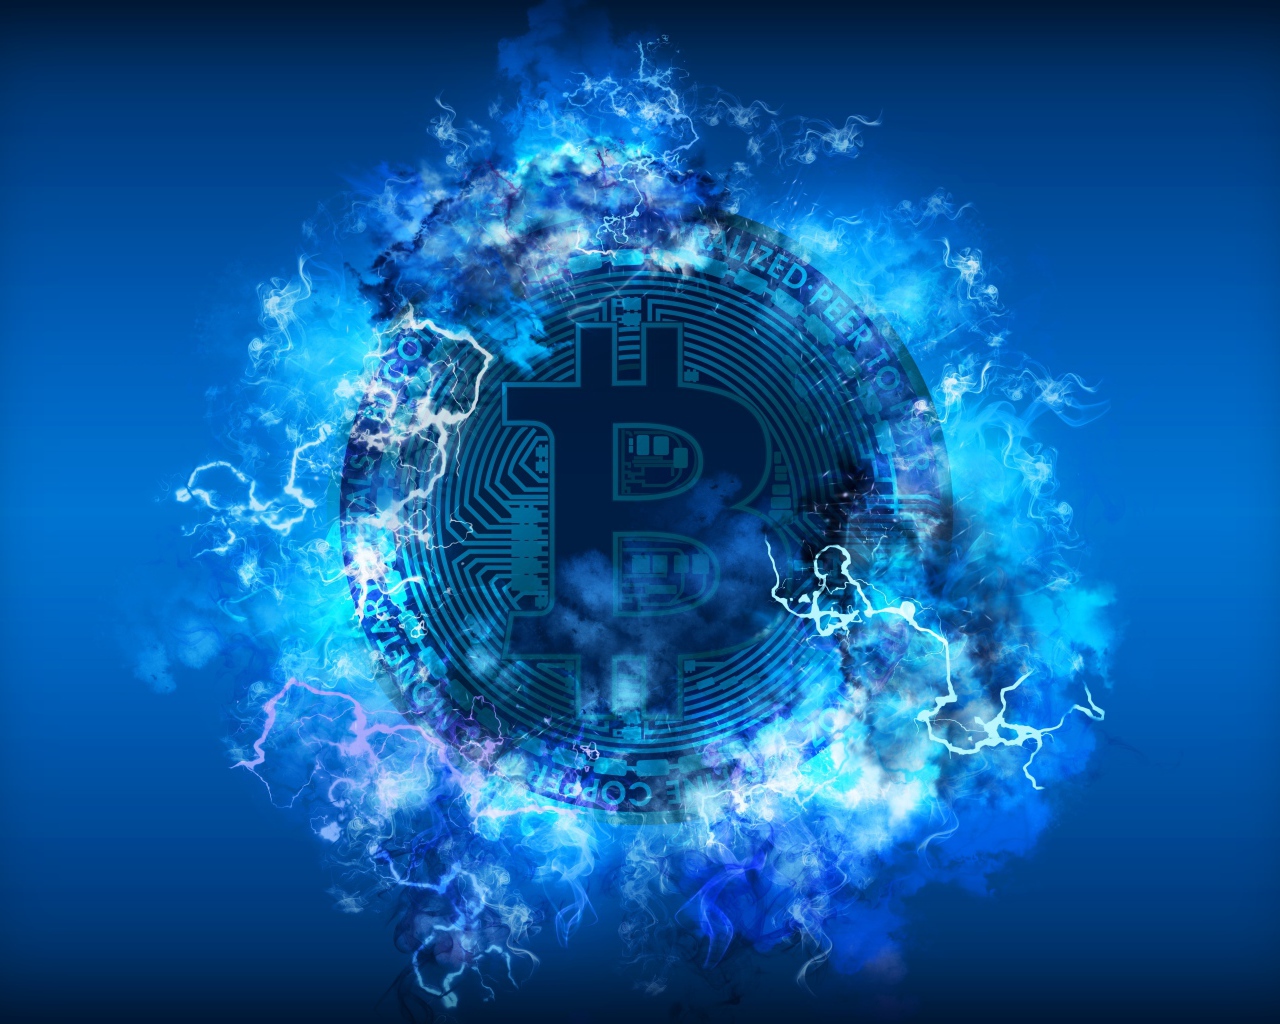 Coin bitcoin with lightning bolts on a blue background